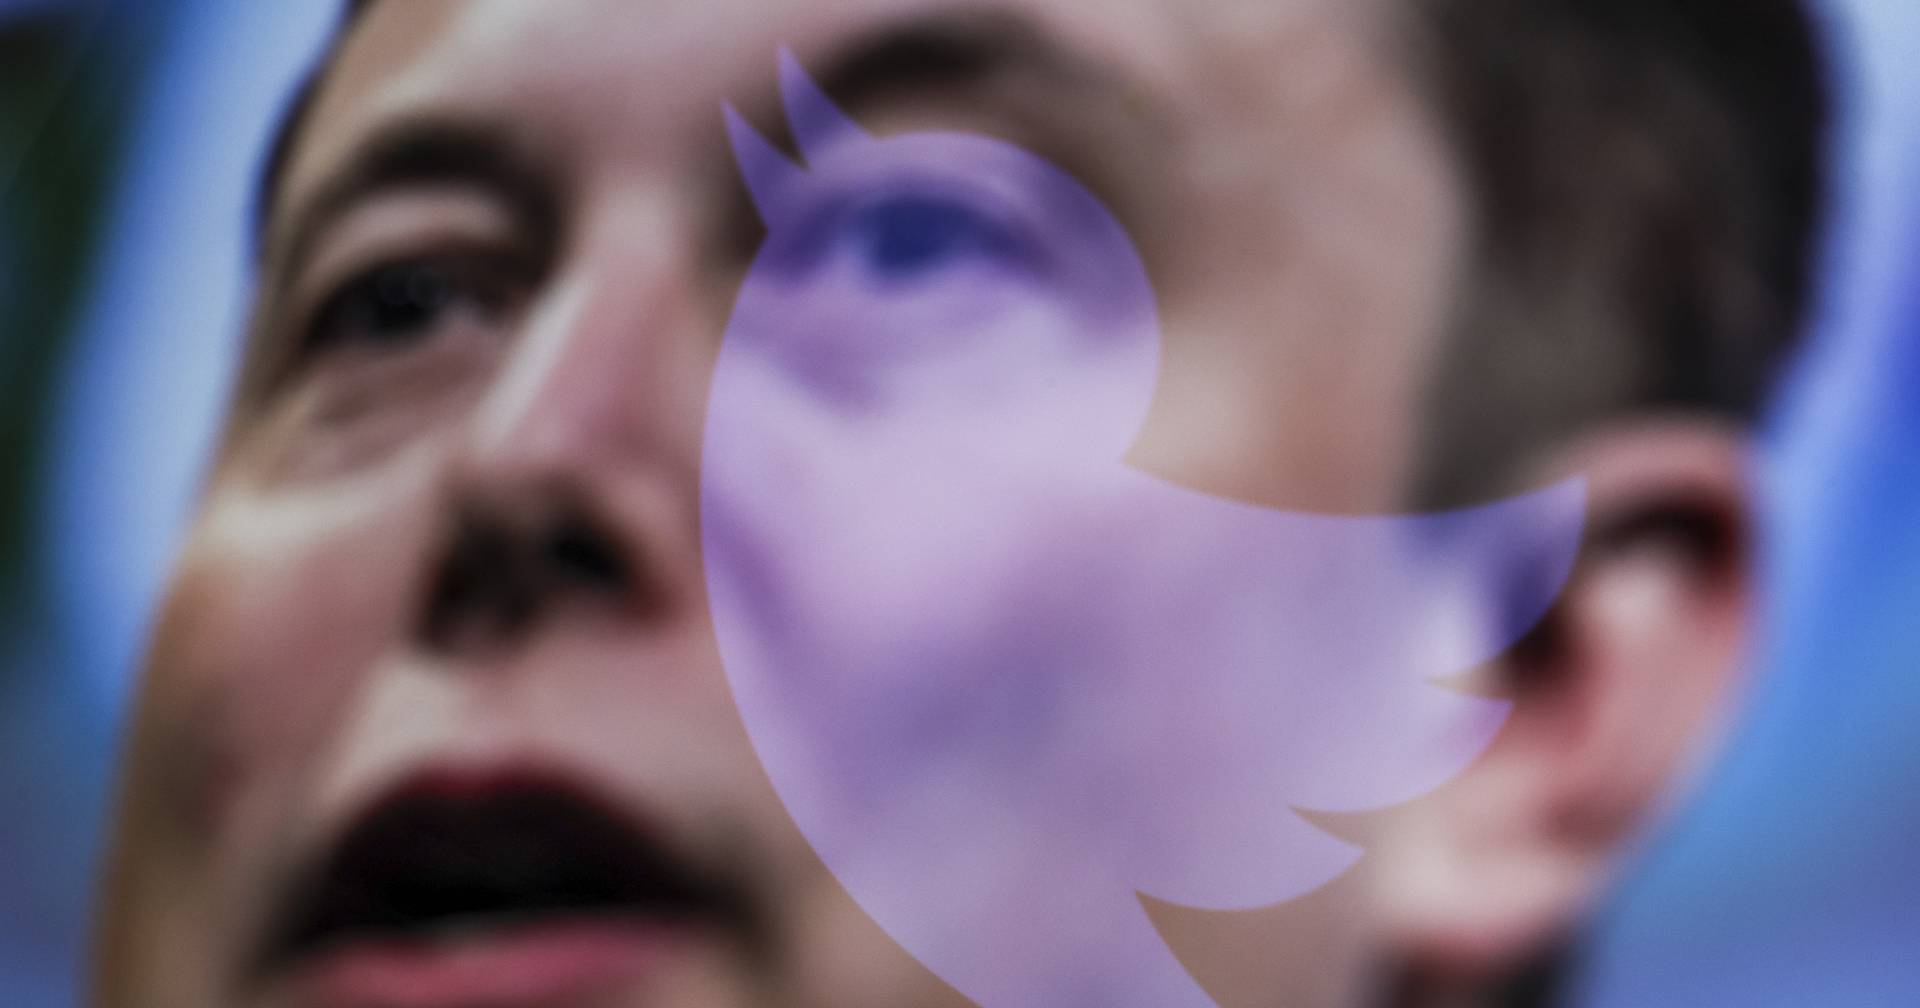 “Freedom of speech, but inaccessibility”: Twitter made “secret blacklists” and limited the visibility of accounts and topics